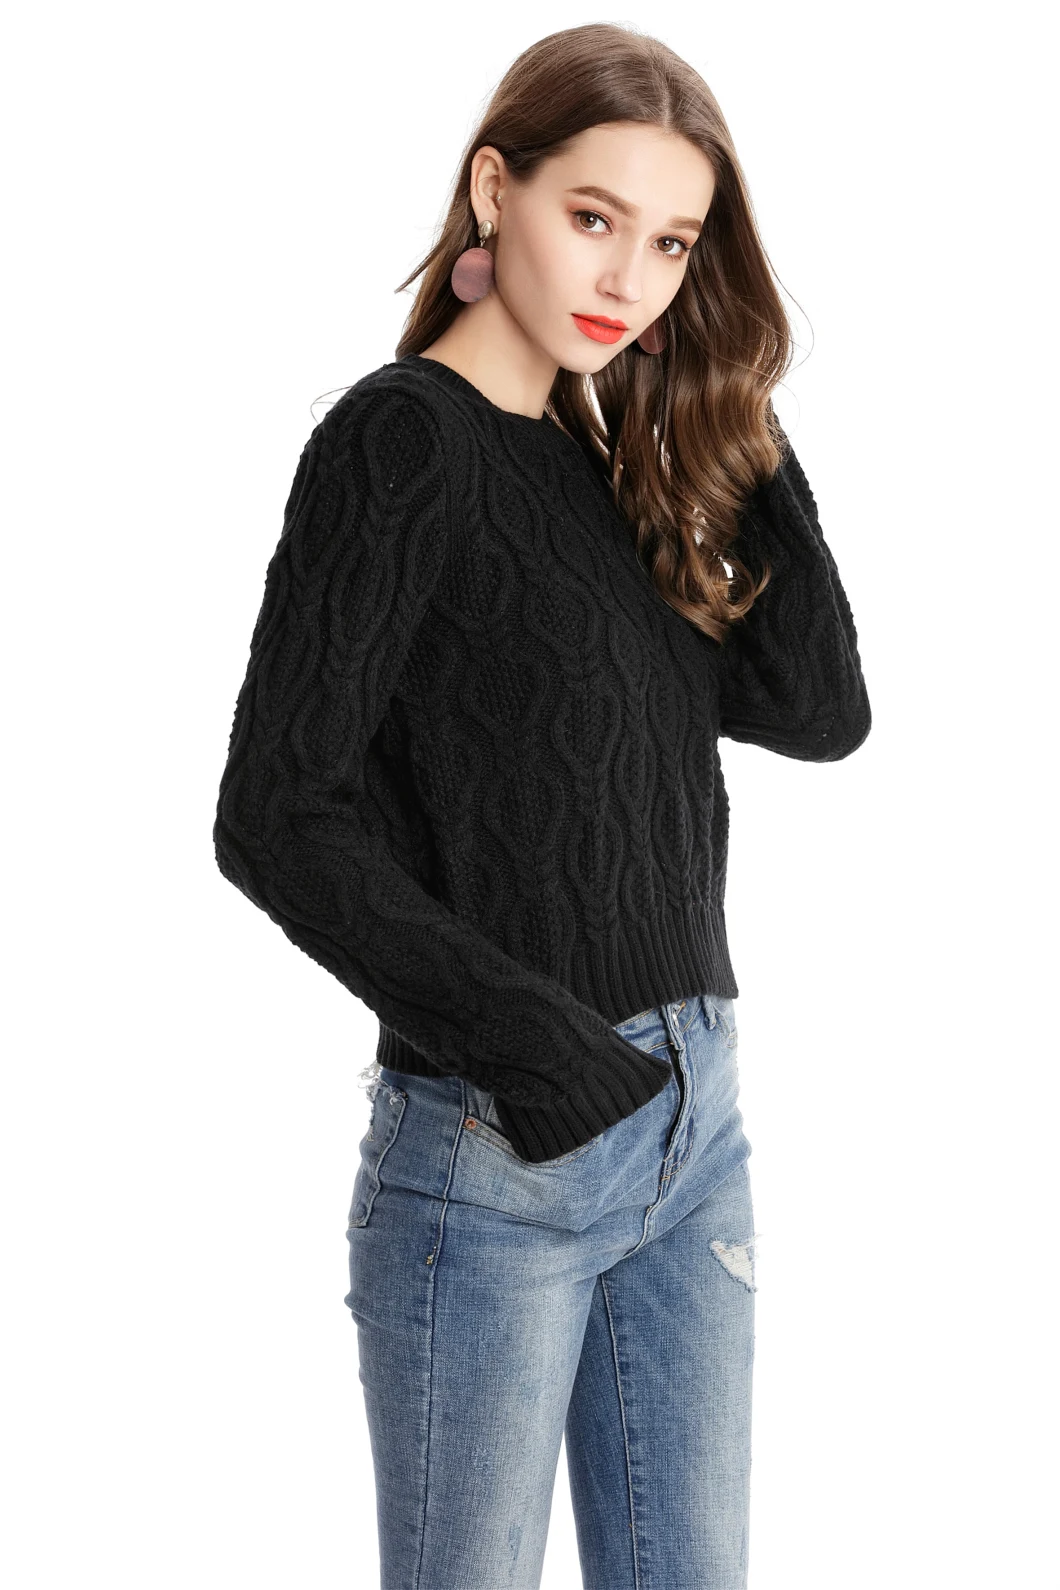 Women Pullover Ladies Knitwear Solid Color Apparel Round Neck Sweater